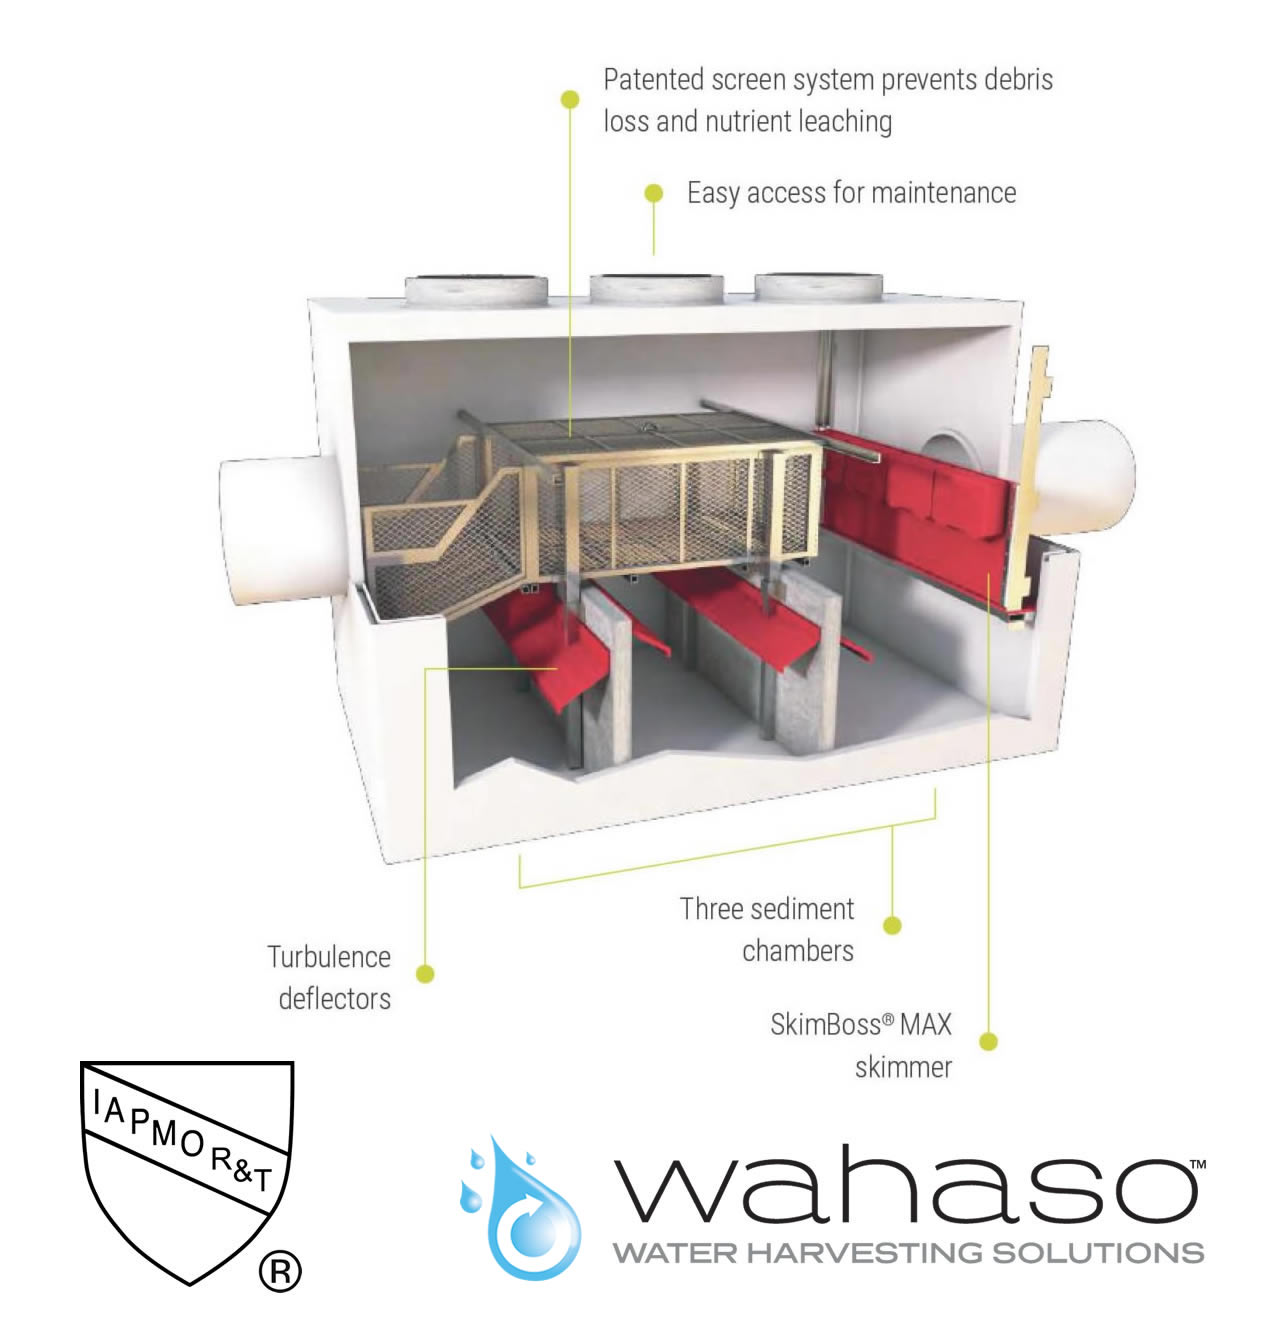 wahaso-commercial-stormwater-harvesting-systems-2